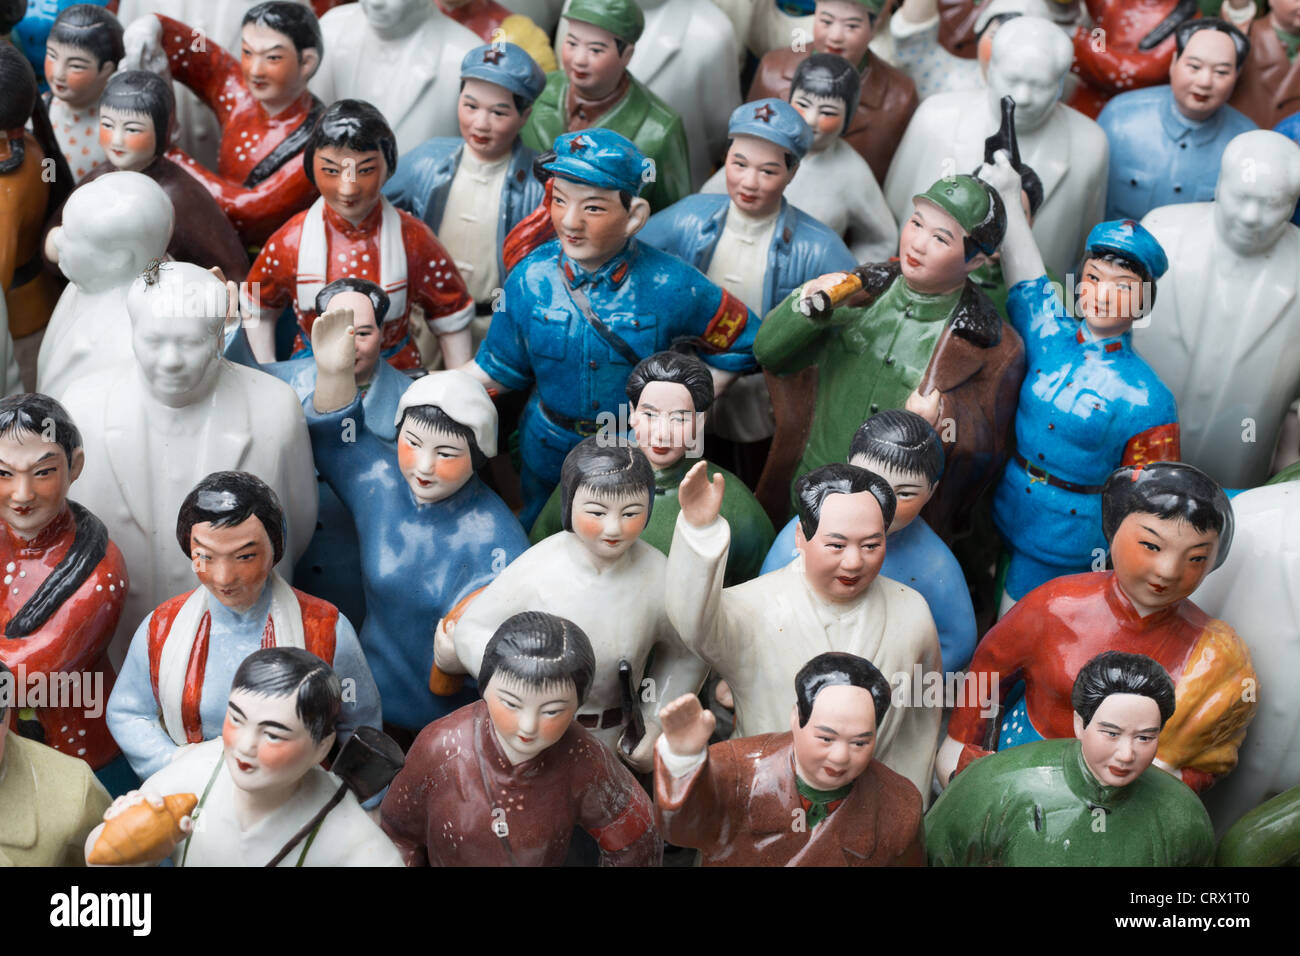 Chairman Mao memorabilia on sale in Dongtai Road Antique Market in Shanghai, China. Stock Photo